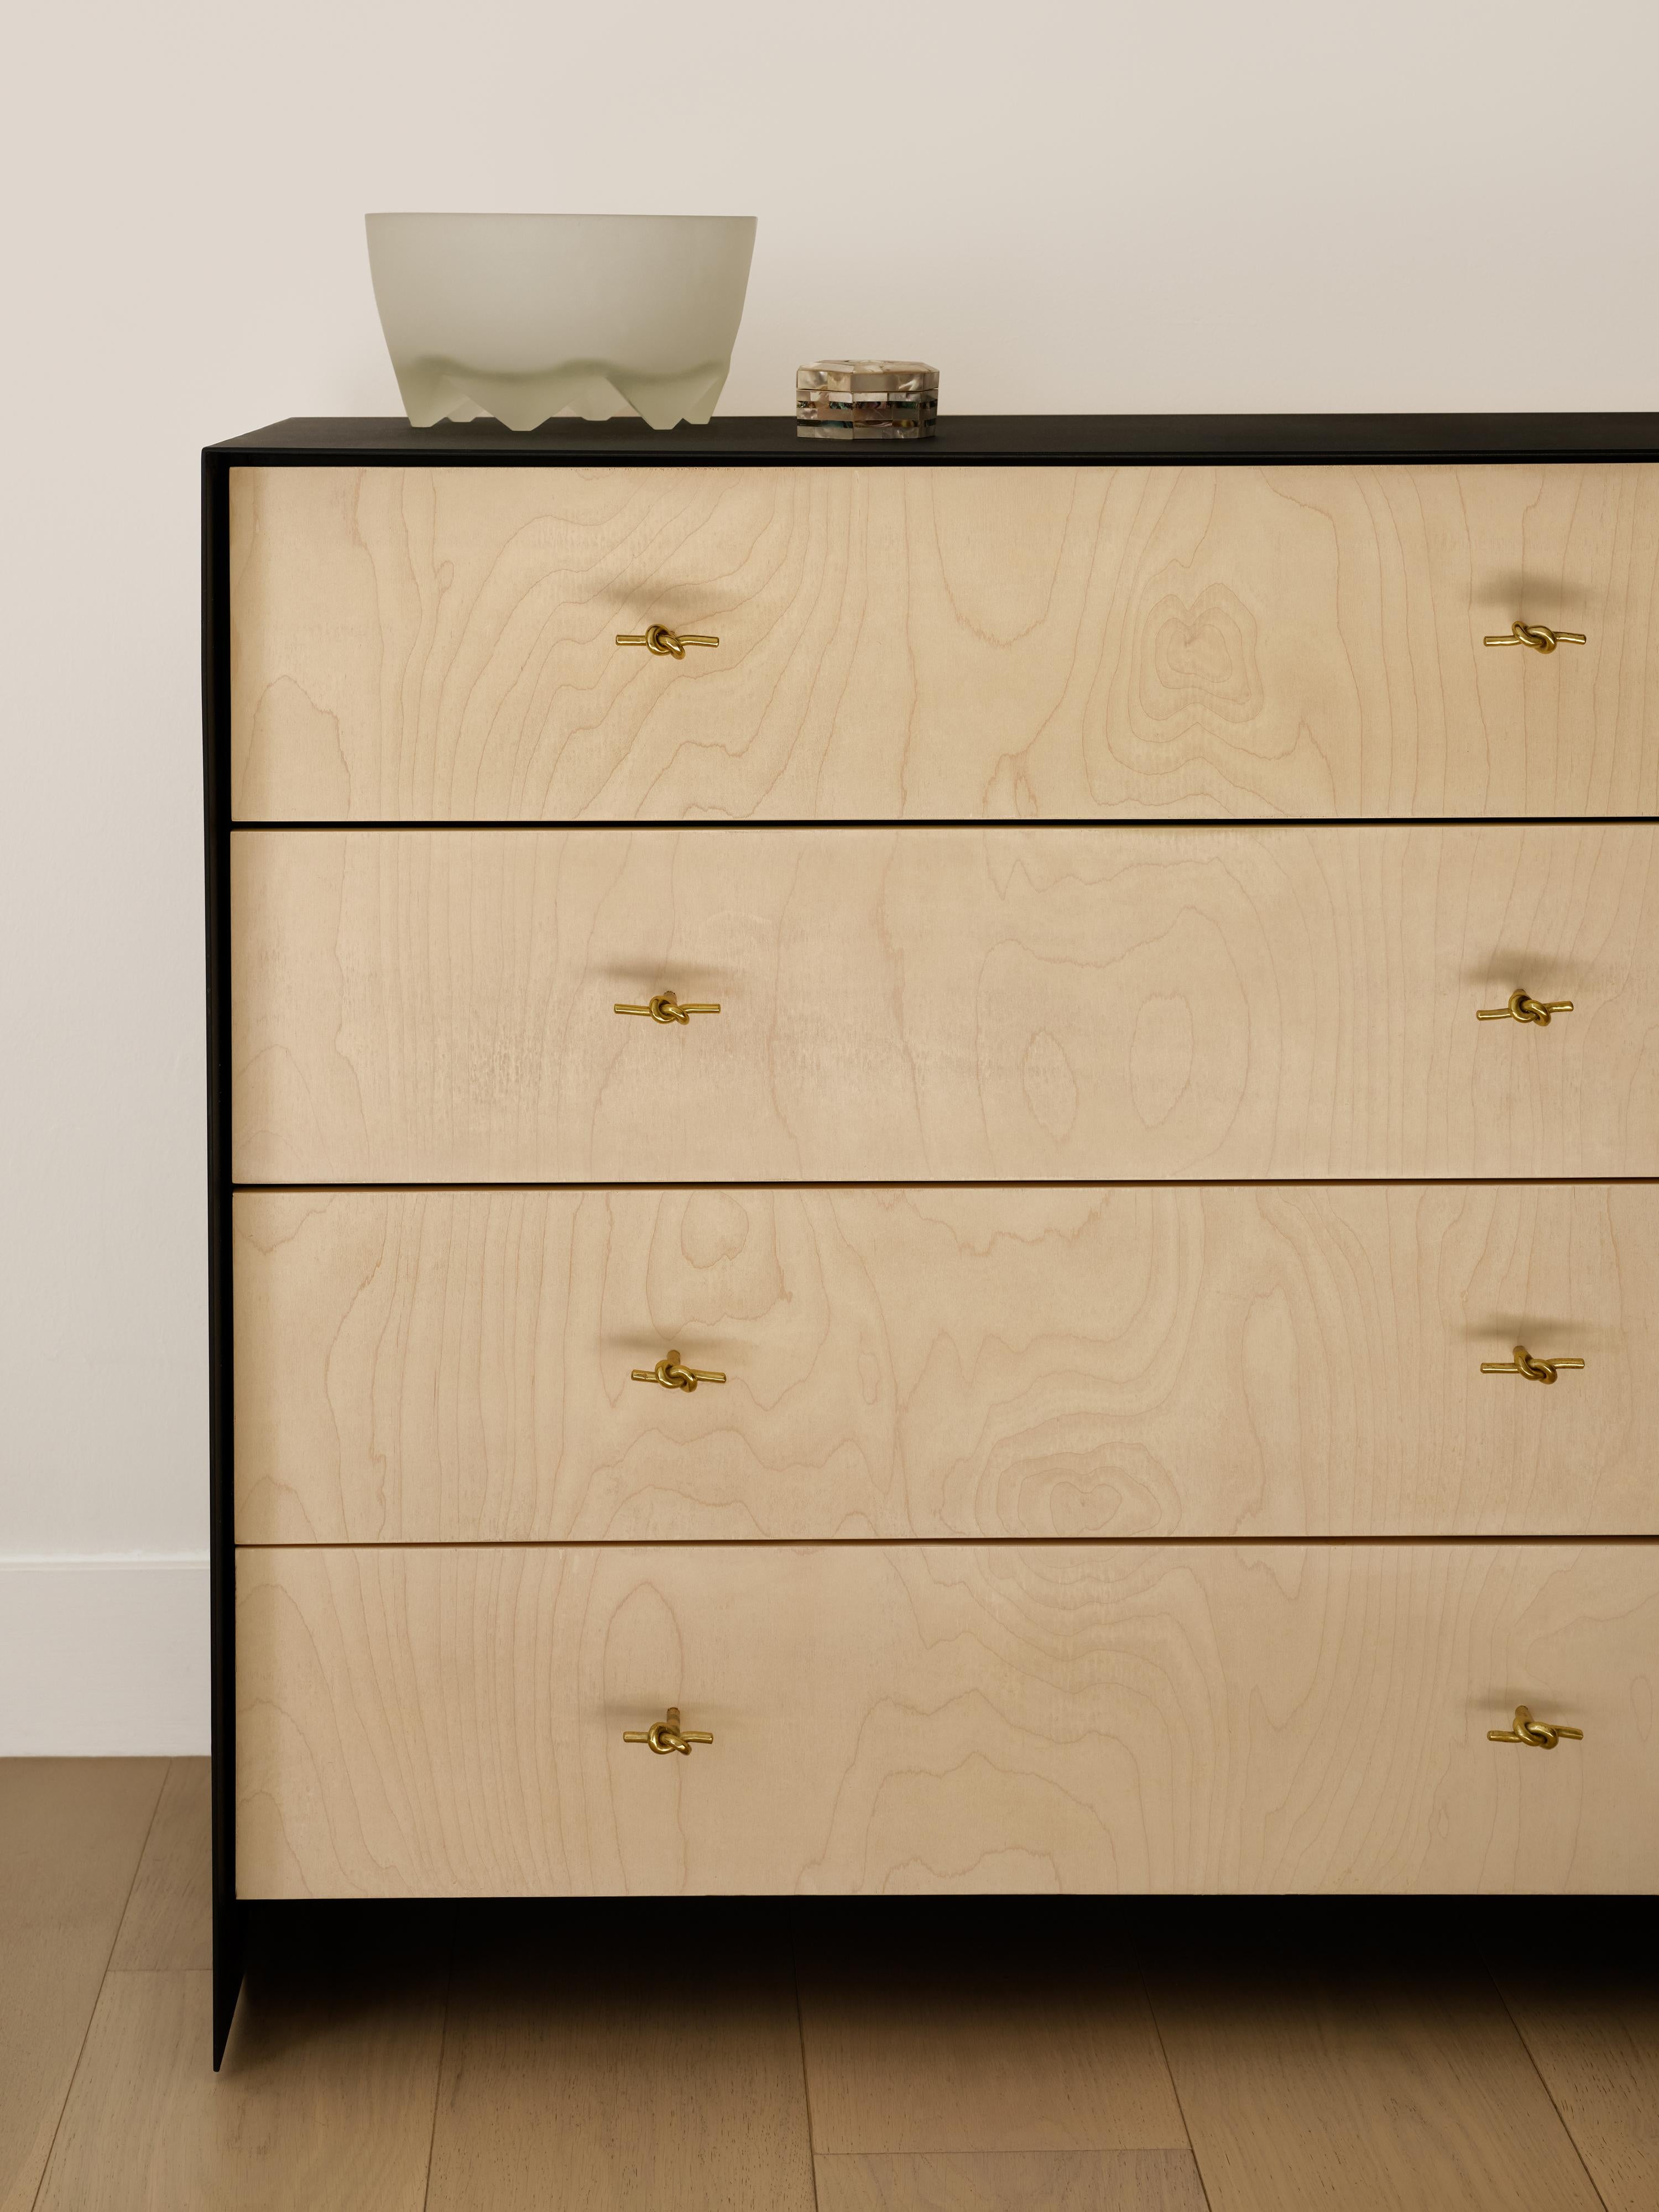 KNOT A DRESSER LARGE 


Introducing the Knot a Dresser. Designed and meticulously hand-crafted in Los Angeles by Studio Qasabian. 

Made-to-Order Excellence: Knot a Dresser is a testament to bespoke craftsmanship, and can be tailored to your